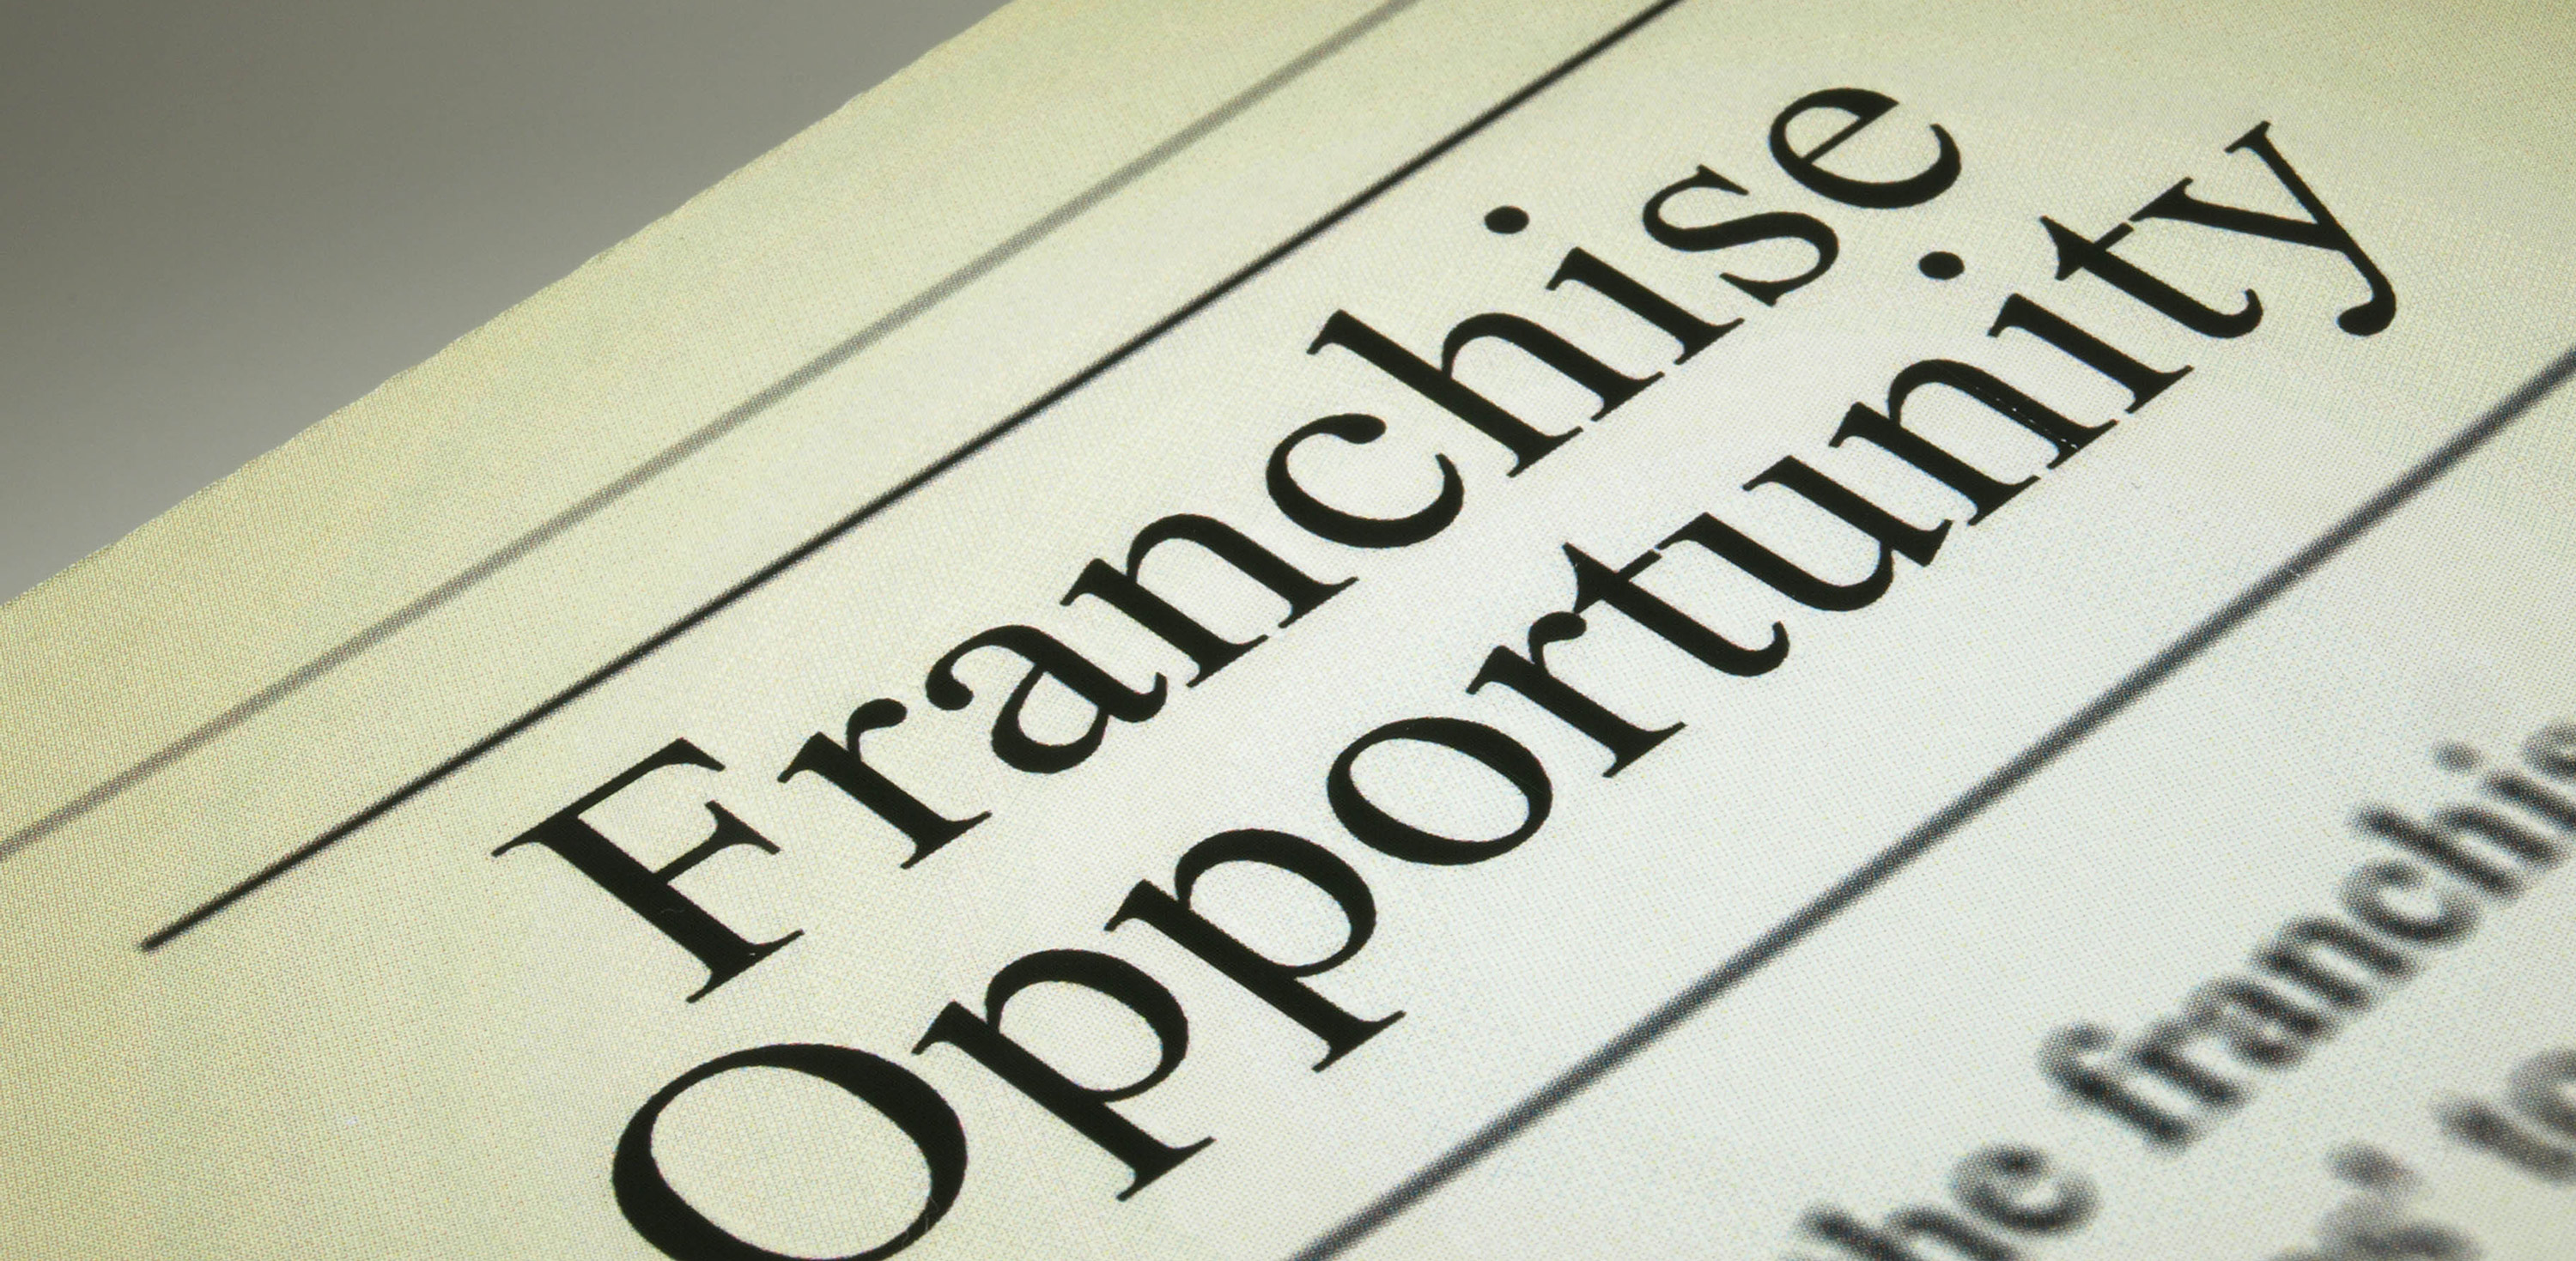 CDG-INTELLECTUAL PROPERTY & FRANCHISING